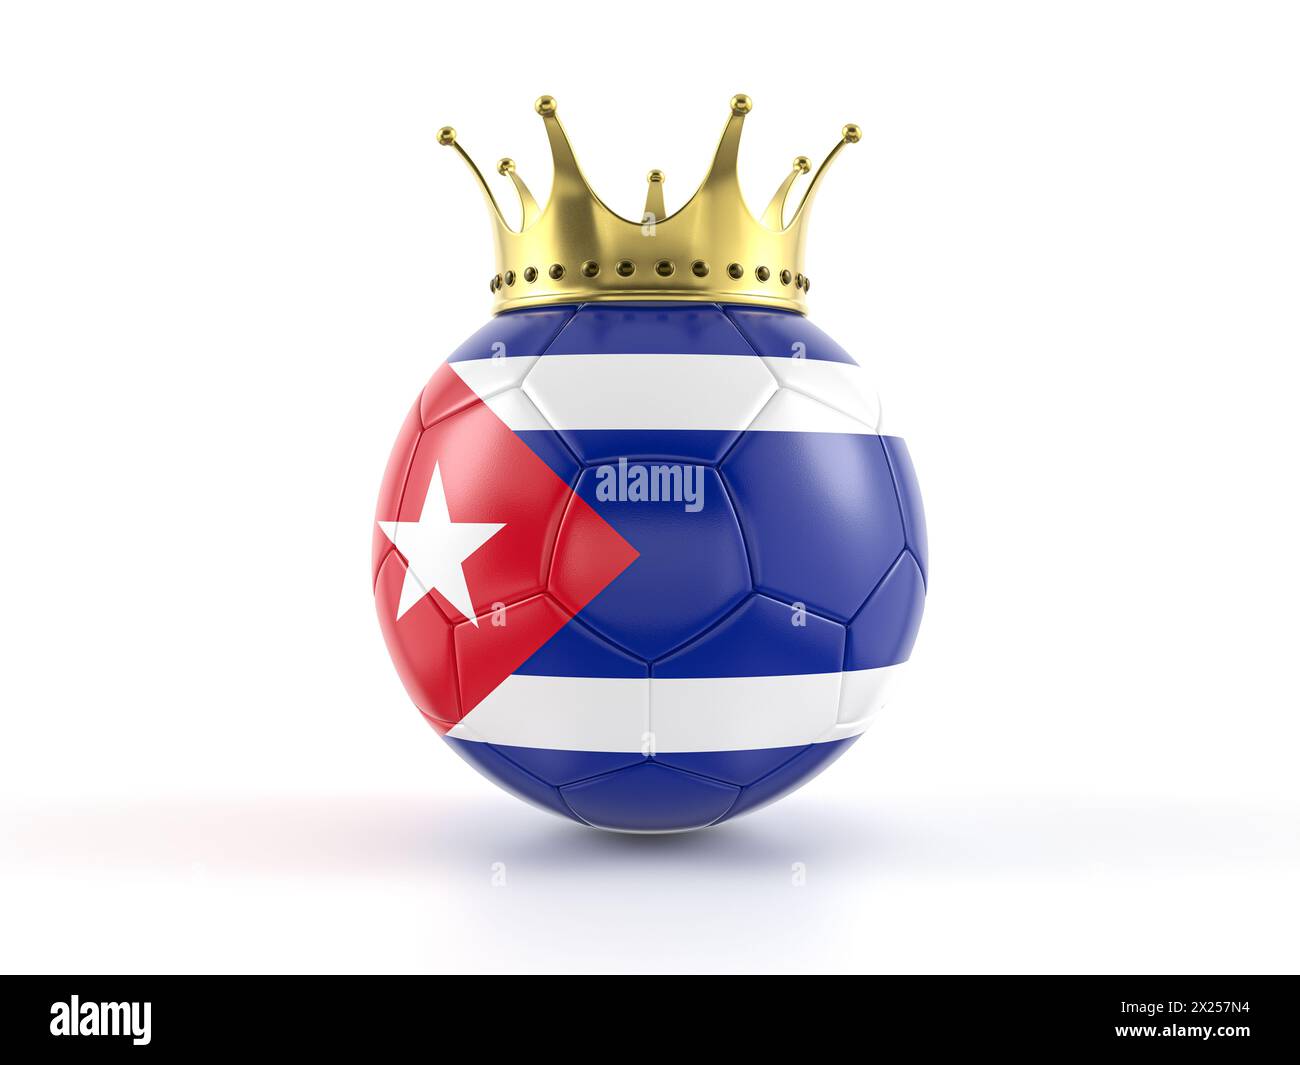 Cuba flag soccer ball with crown on a white background. 3d illustration. Stock Photo